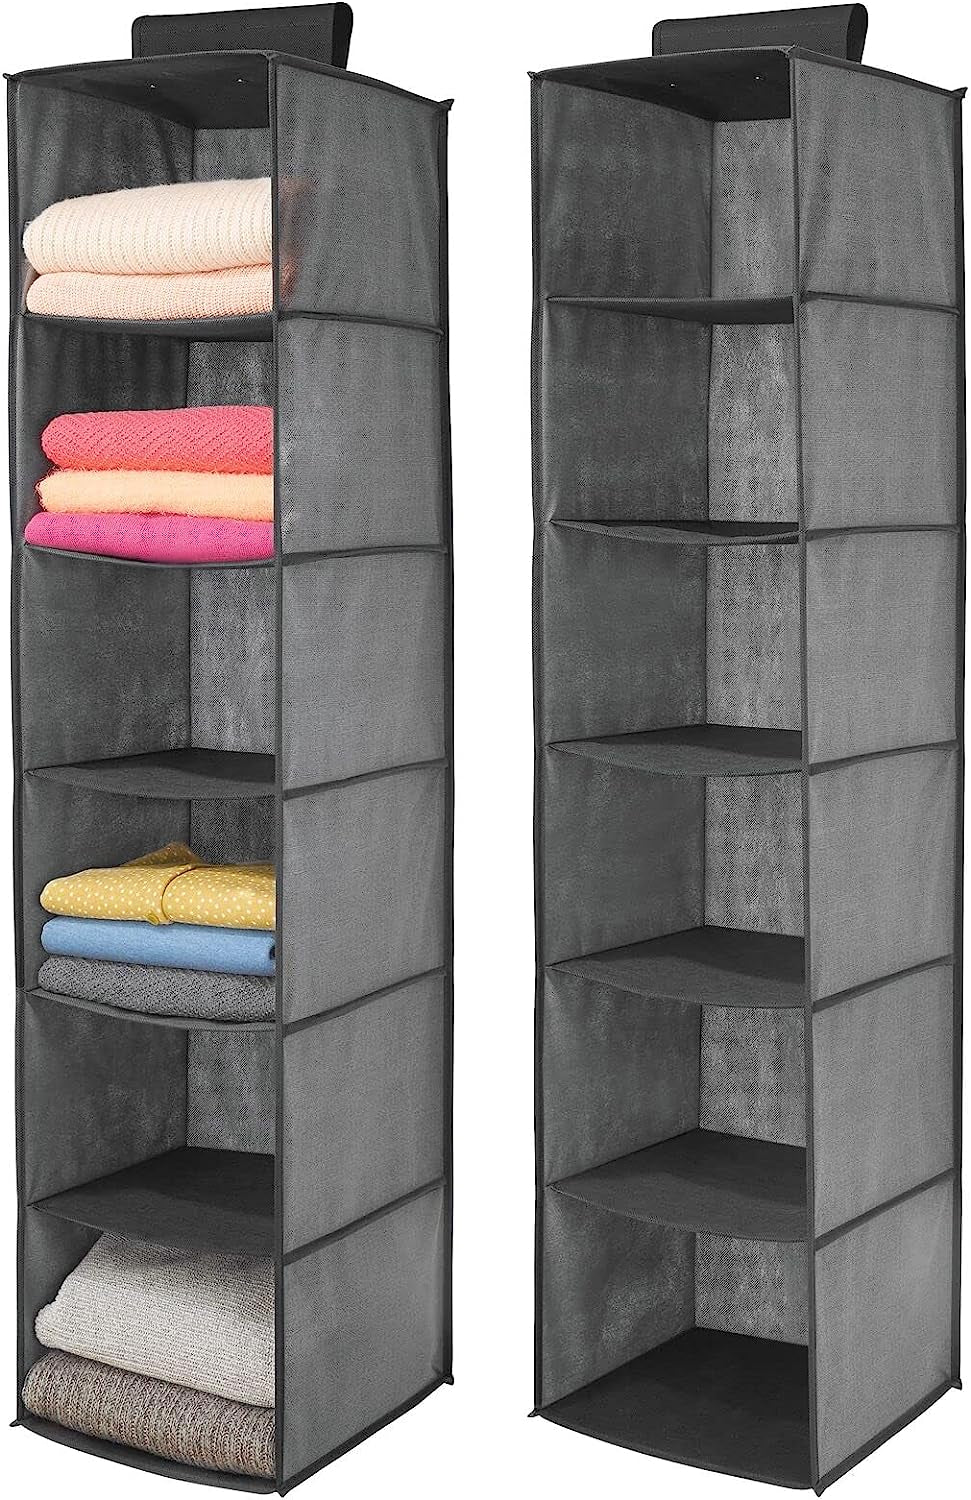 Mdesign Long Soft Fabric over Closet Rod Hanging Storage Organizer with 6 Shelves for Clothes, Leggings, Lingerie, T Shirts - Textured Print with Solid Trim - 2 Pack - Gray